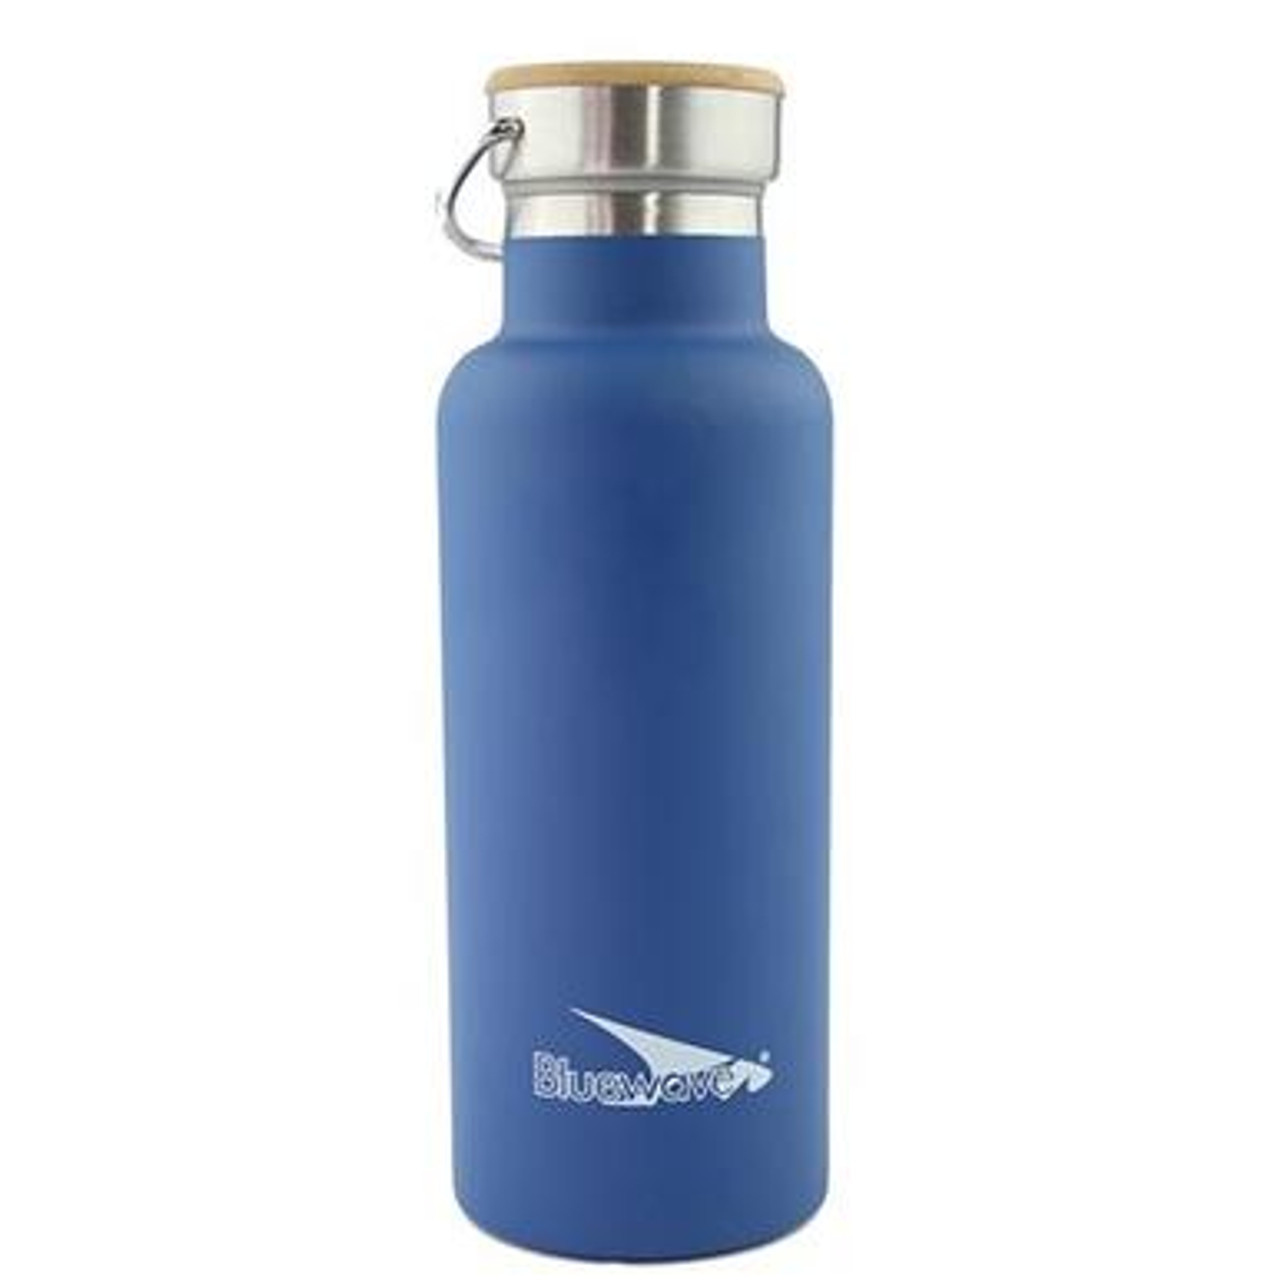 https://cdn11.bigcommerce.com/s-ovptlwt64t/images/stencil/1280x1280/products/508/2050/D2-Insulated-Water-Bottle-500ml-17oz-Navy-Blue-1__79254.1594402097.jpg?c=1